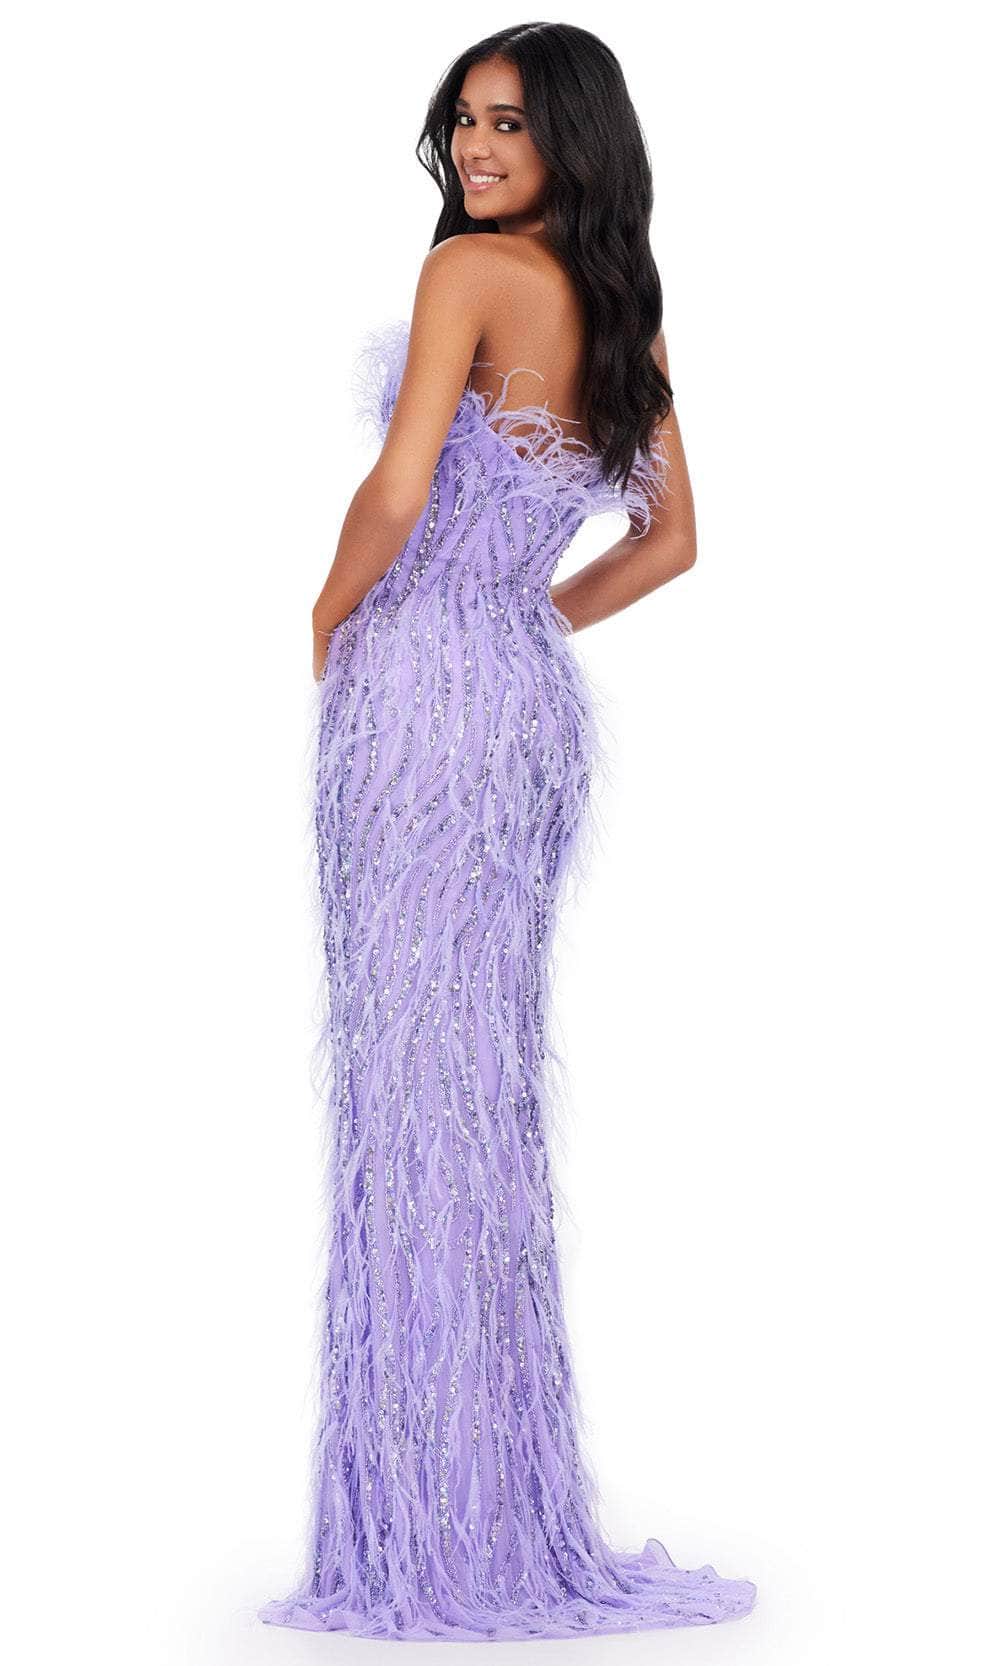 Ashley Lauren 11453 - Feather Detailed Prom Dress Prom Dresses